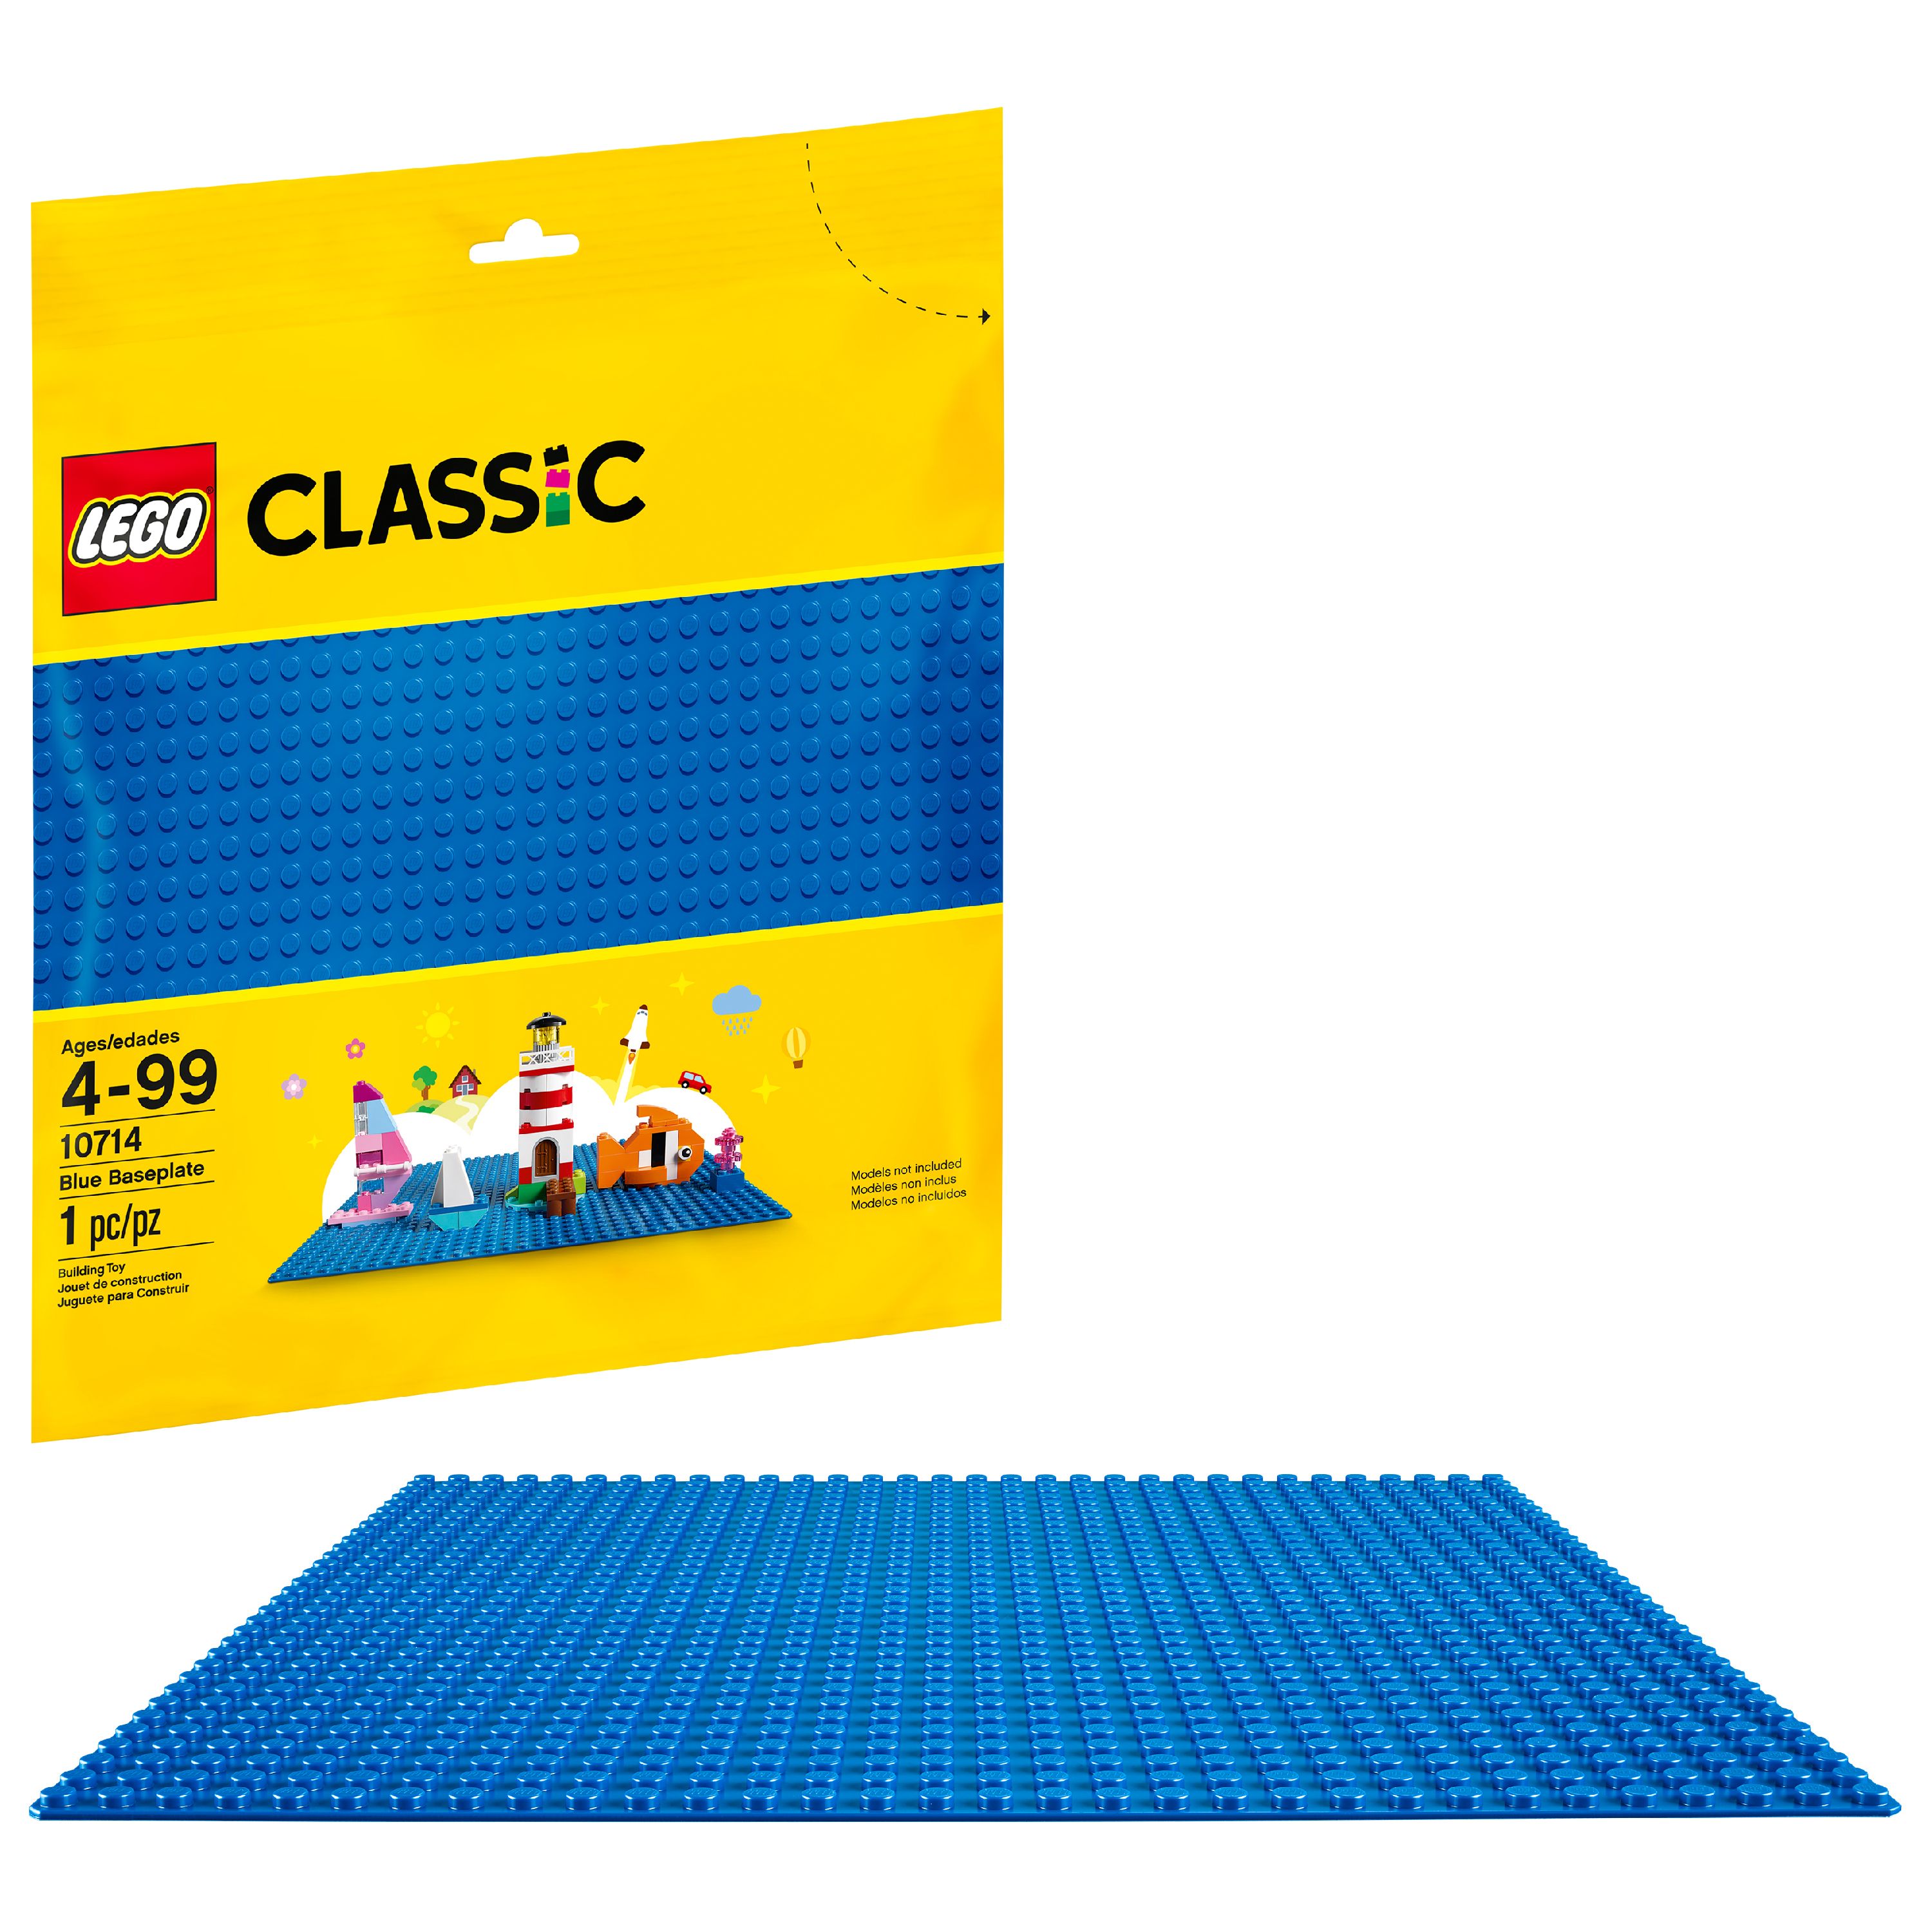 LEGO Classic Blue Baseplate 10714 Popular Toy Building Accessory - image 1 of 10